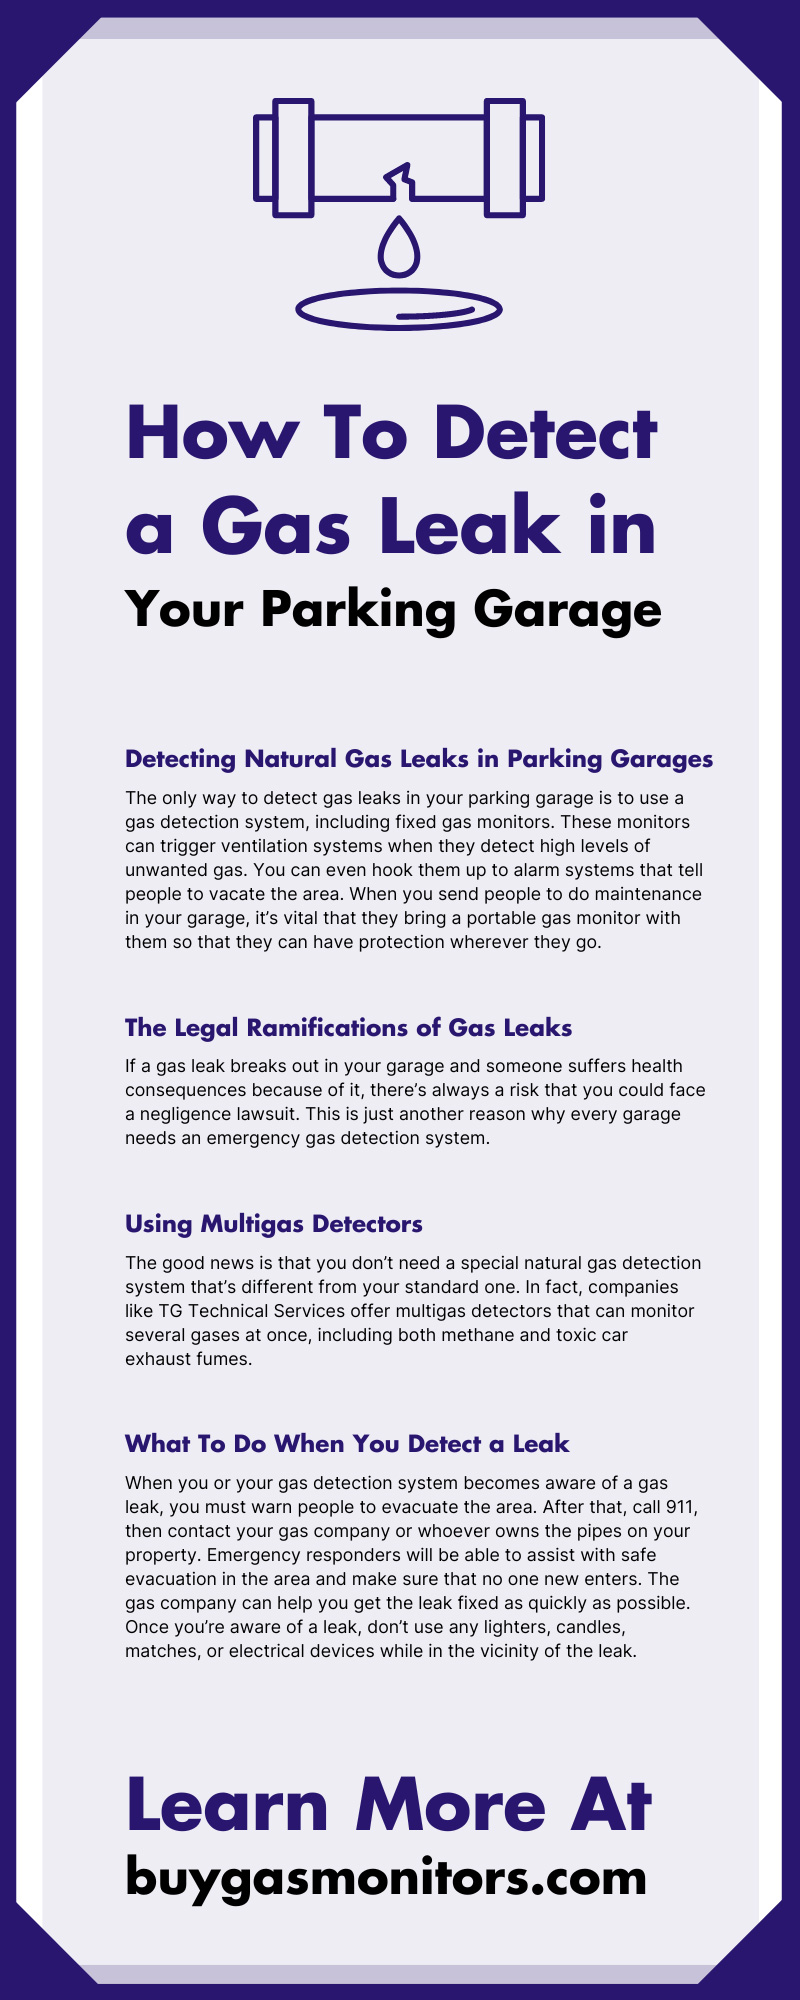 How To Detect a Gas Leak in Your Parking Garage